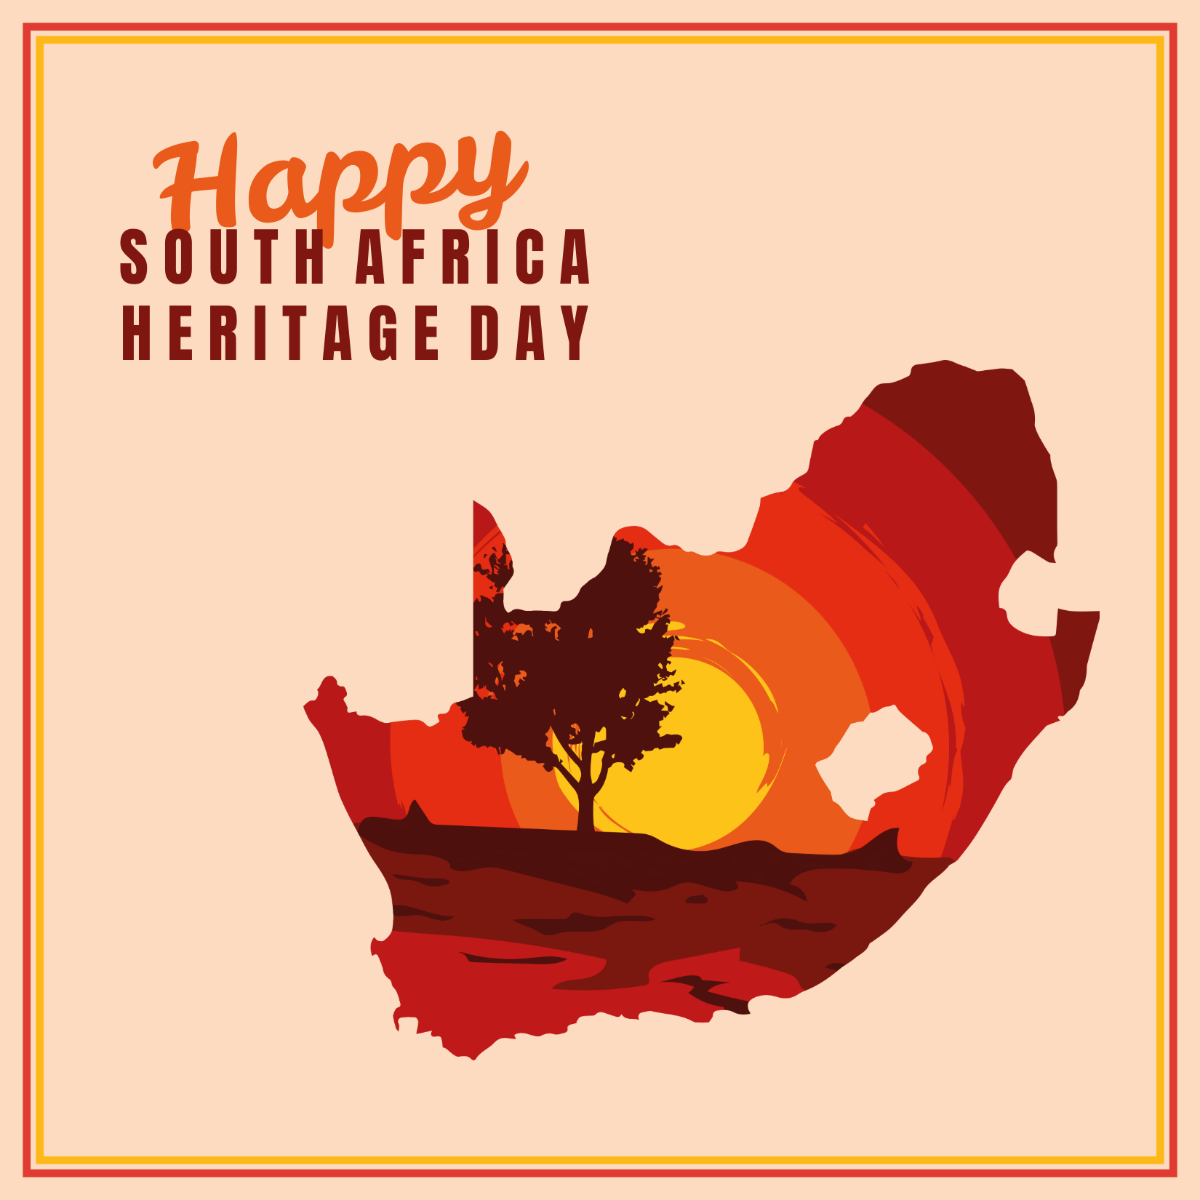 South Africa Heritage Day Instagram Post Template